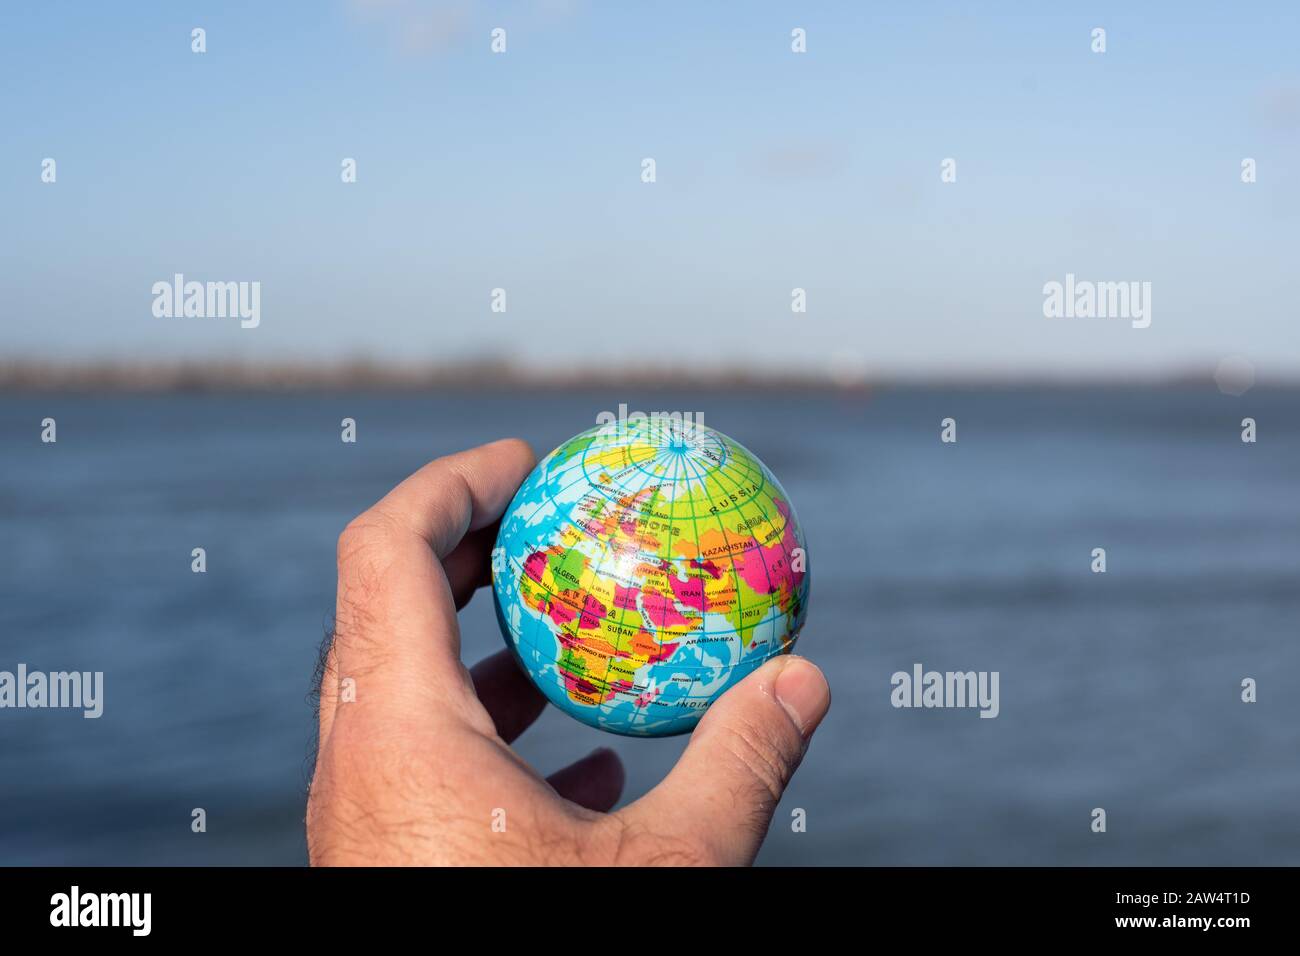 Hand holding a small globe and a lake in the background Stock Photo